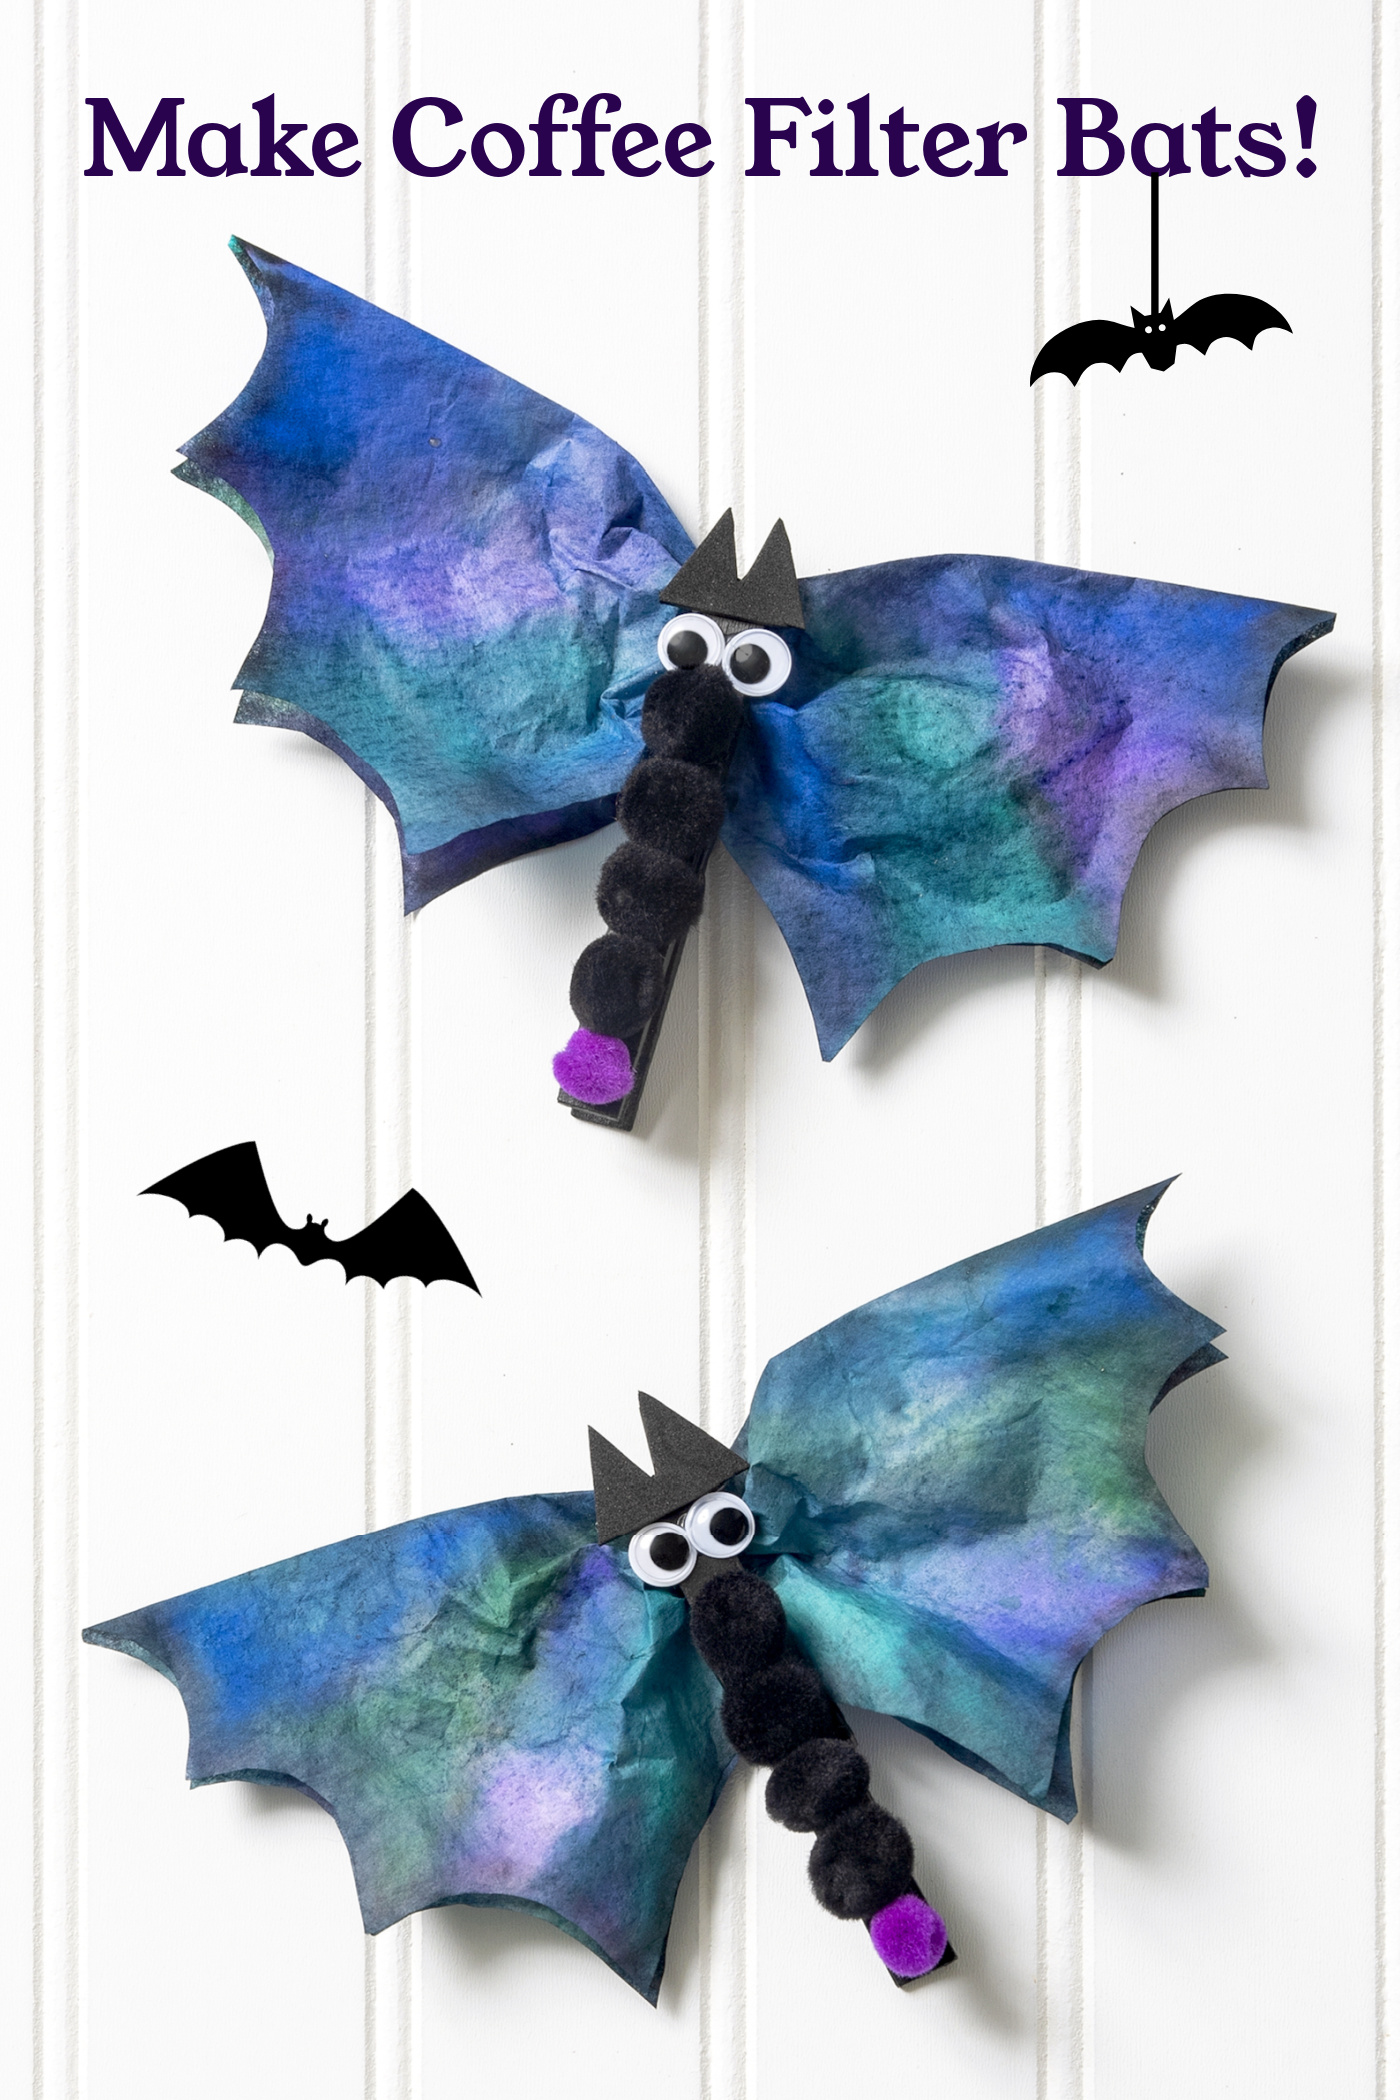 How to make coffee filter bats